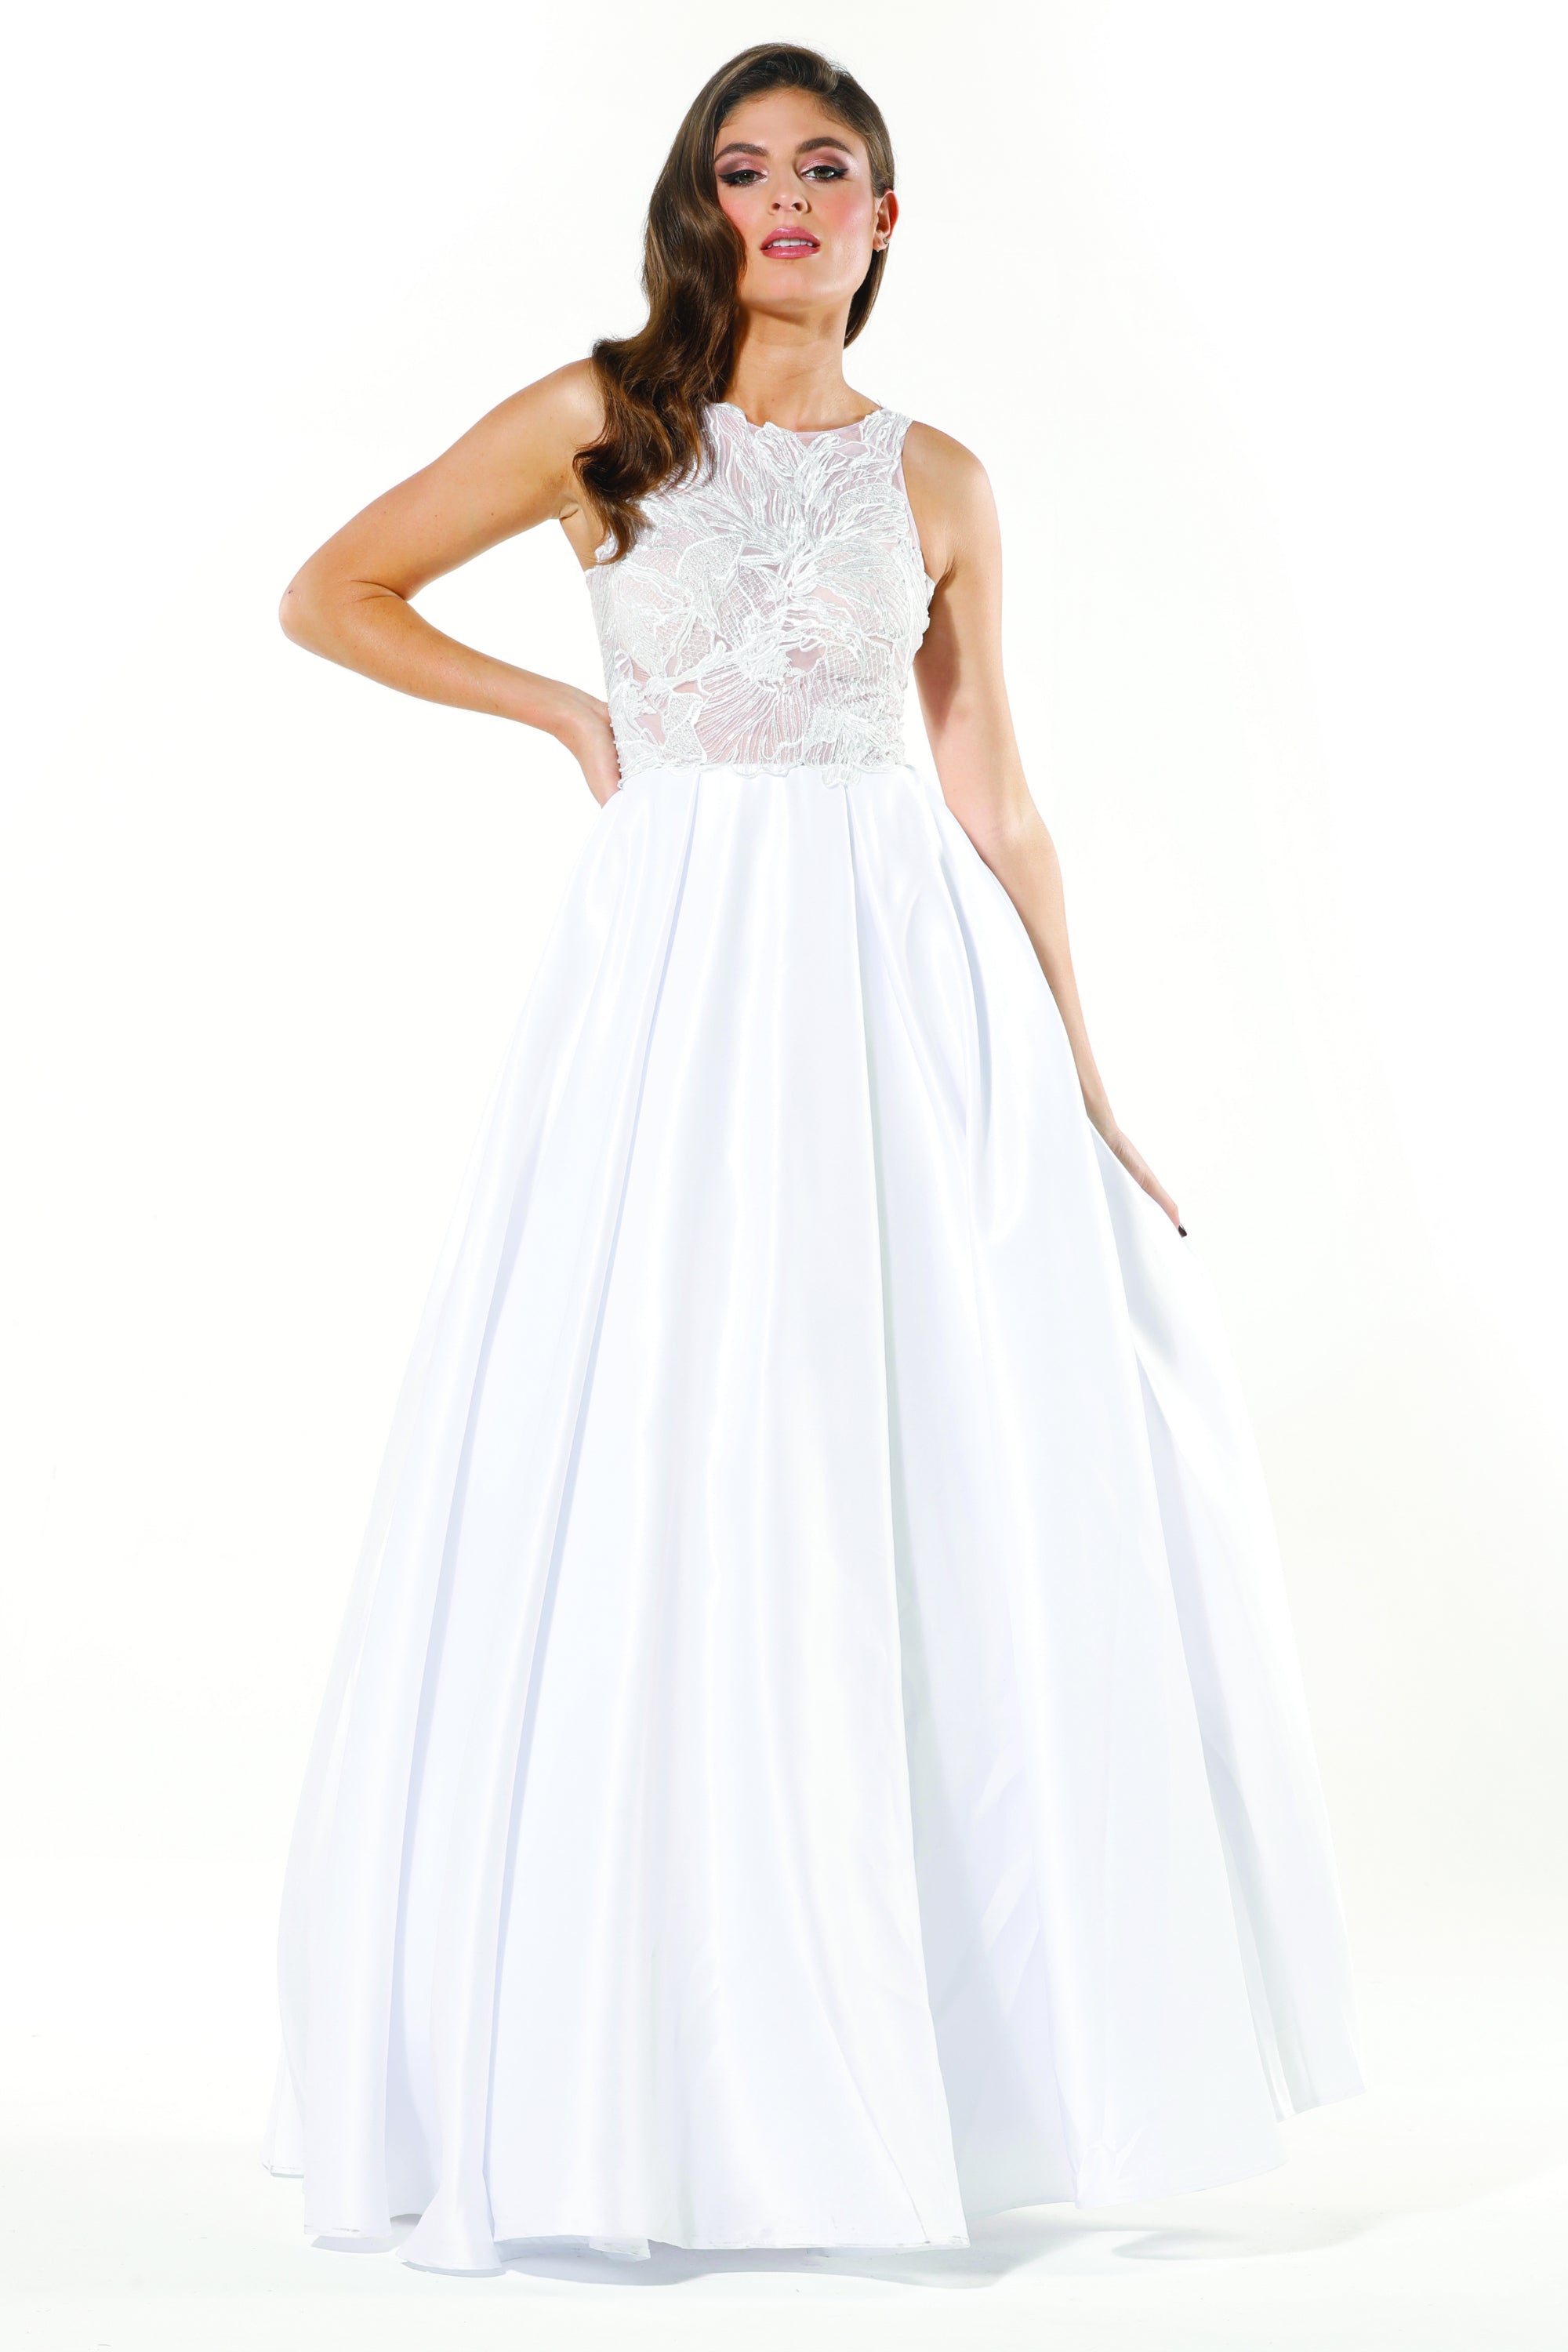 Tinaholy Couture Designer T19435 White Satin Formal Prom Ball Gown Dress Tina Holly Couture$ AfterPay Humm ZipPay LayBuy Sezzle